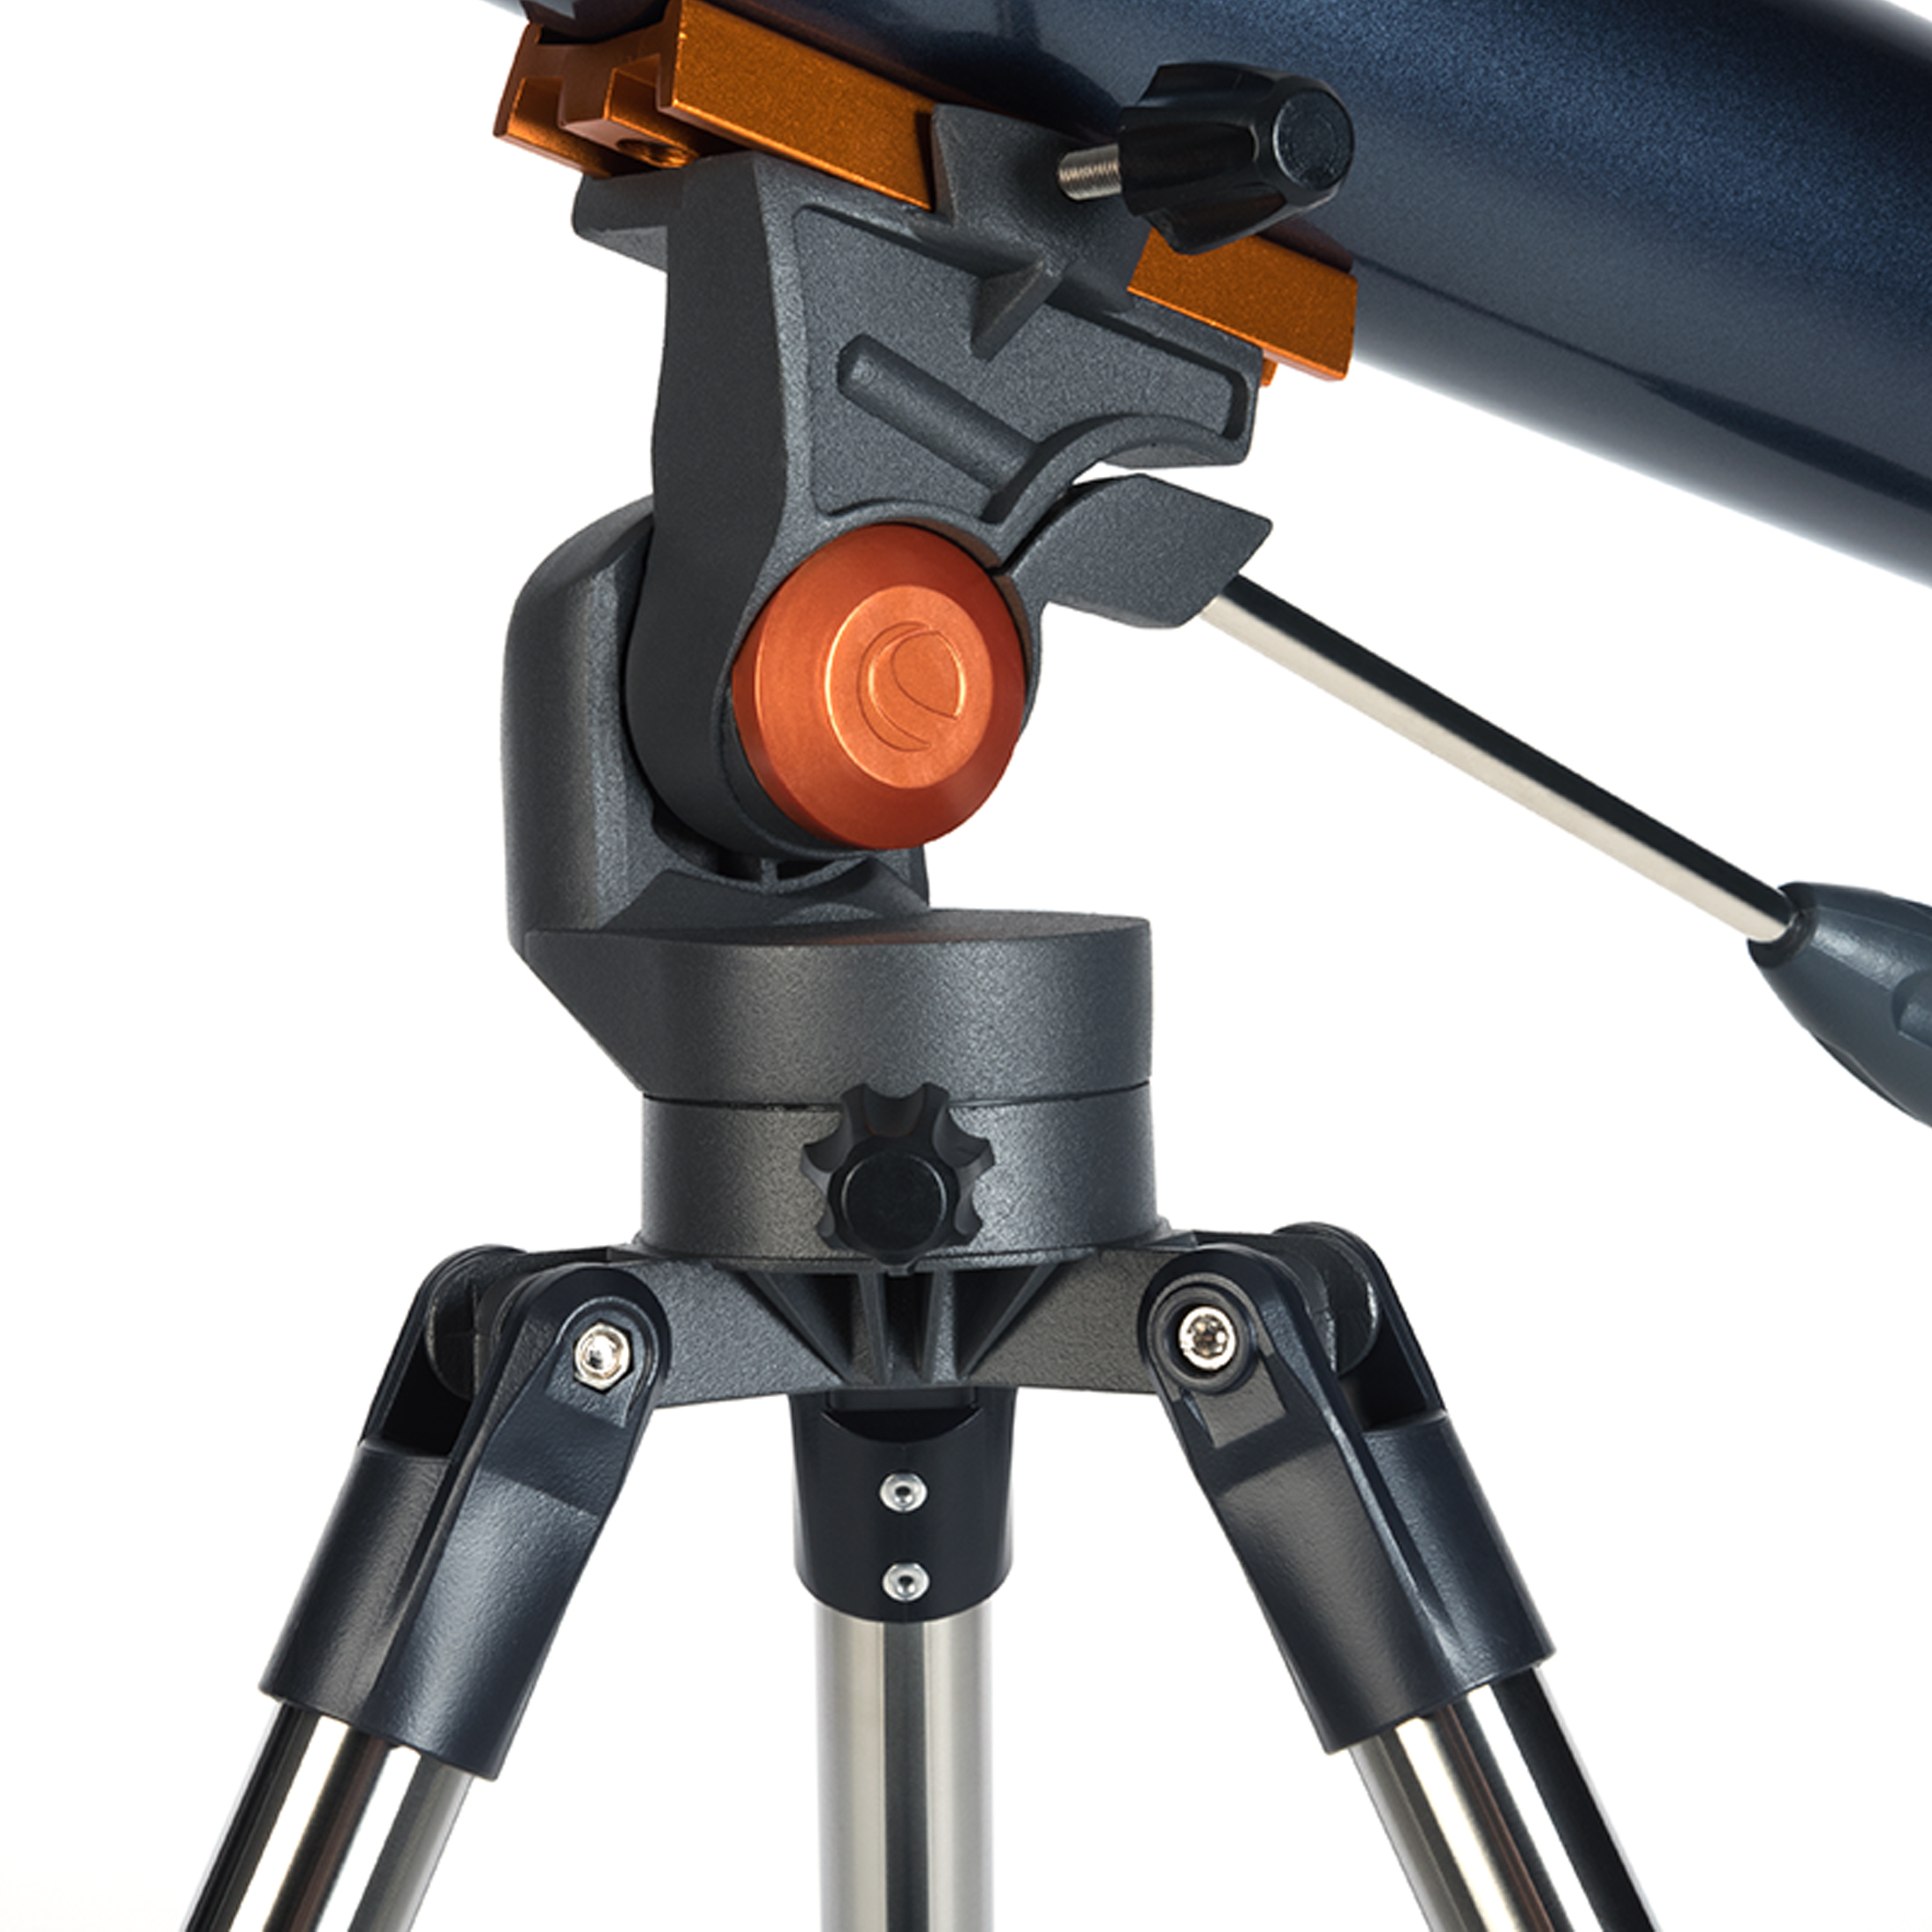 Celestron AstroMaster 70AZ LT Refractor Telescope Kit with Smartphone Adapter and Bluetooth Remote, Ideal Telescope for Beginners, Capture Your Own Images, Tripod plus Bonus Accessories Included - image 5 of 8